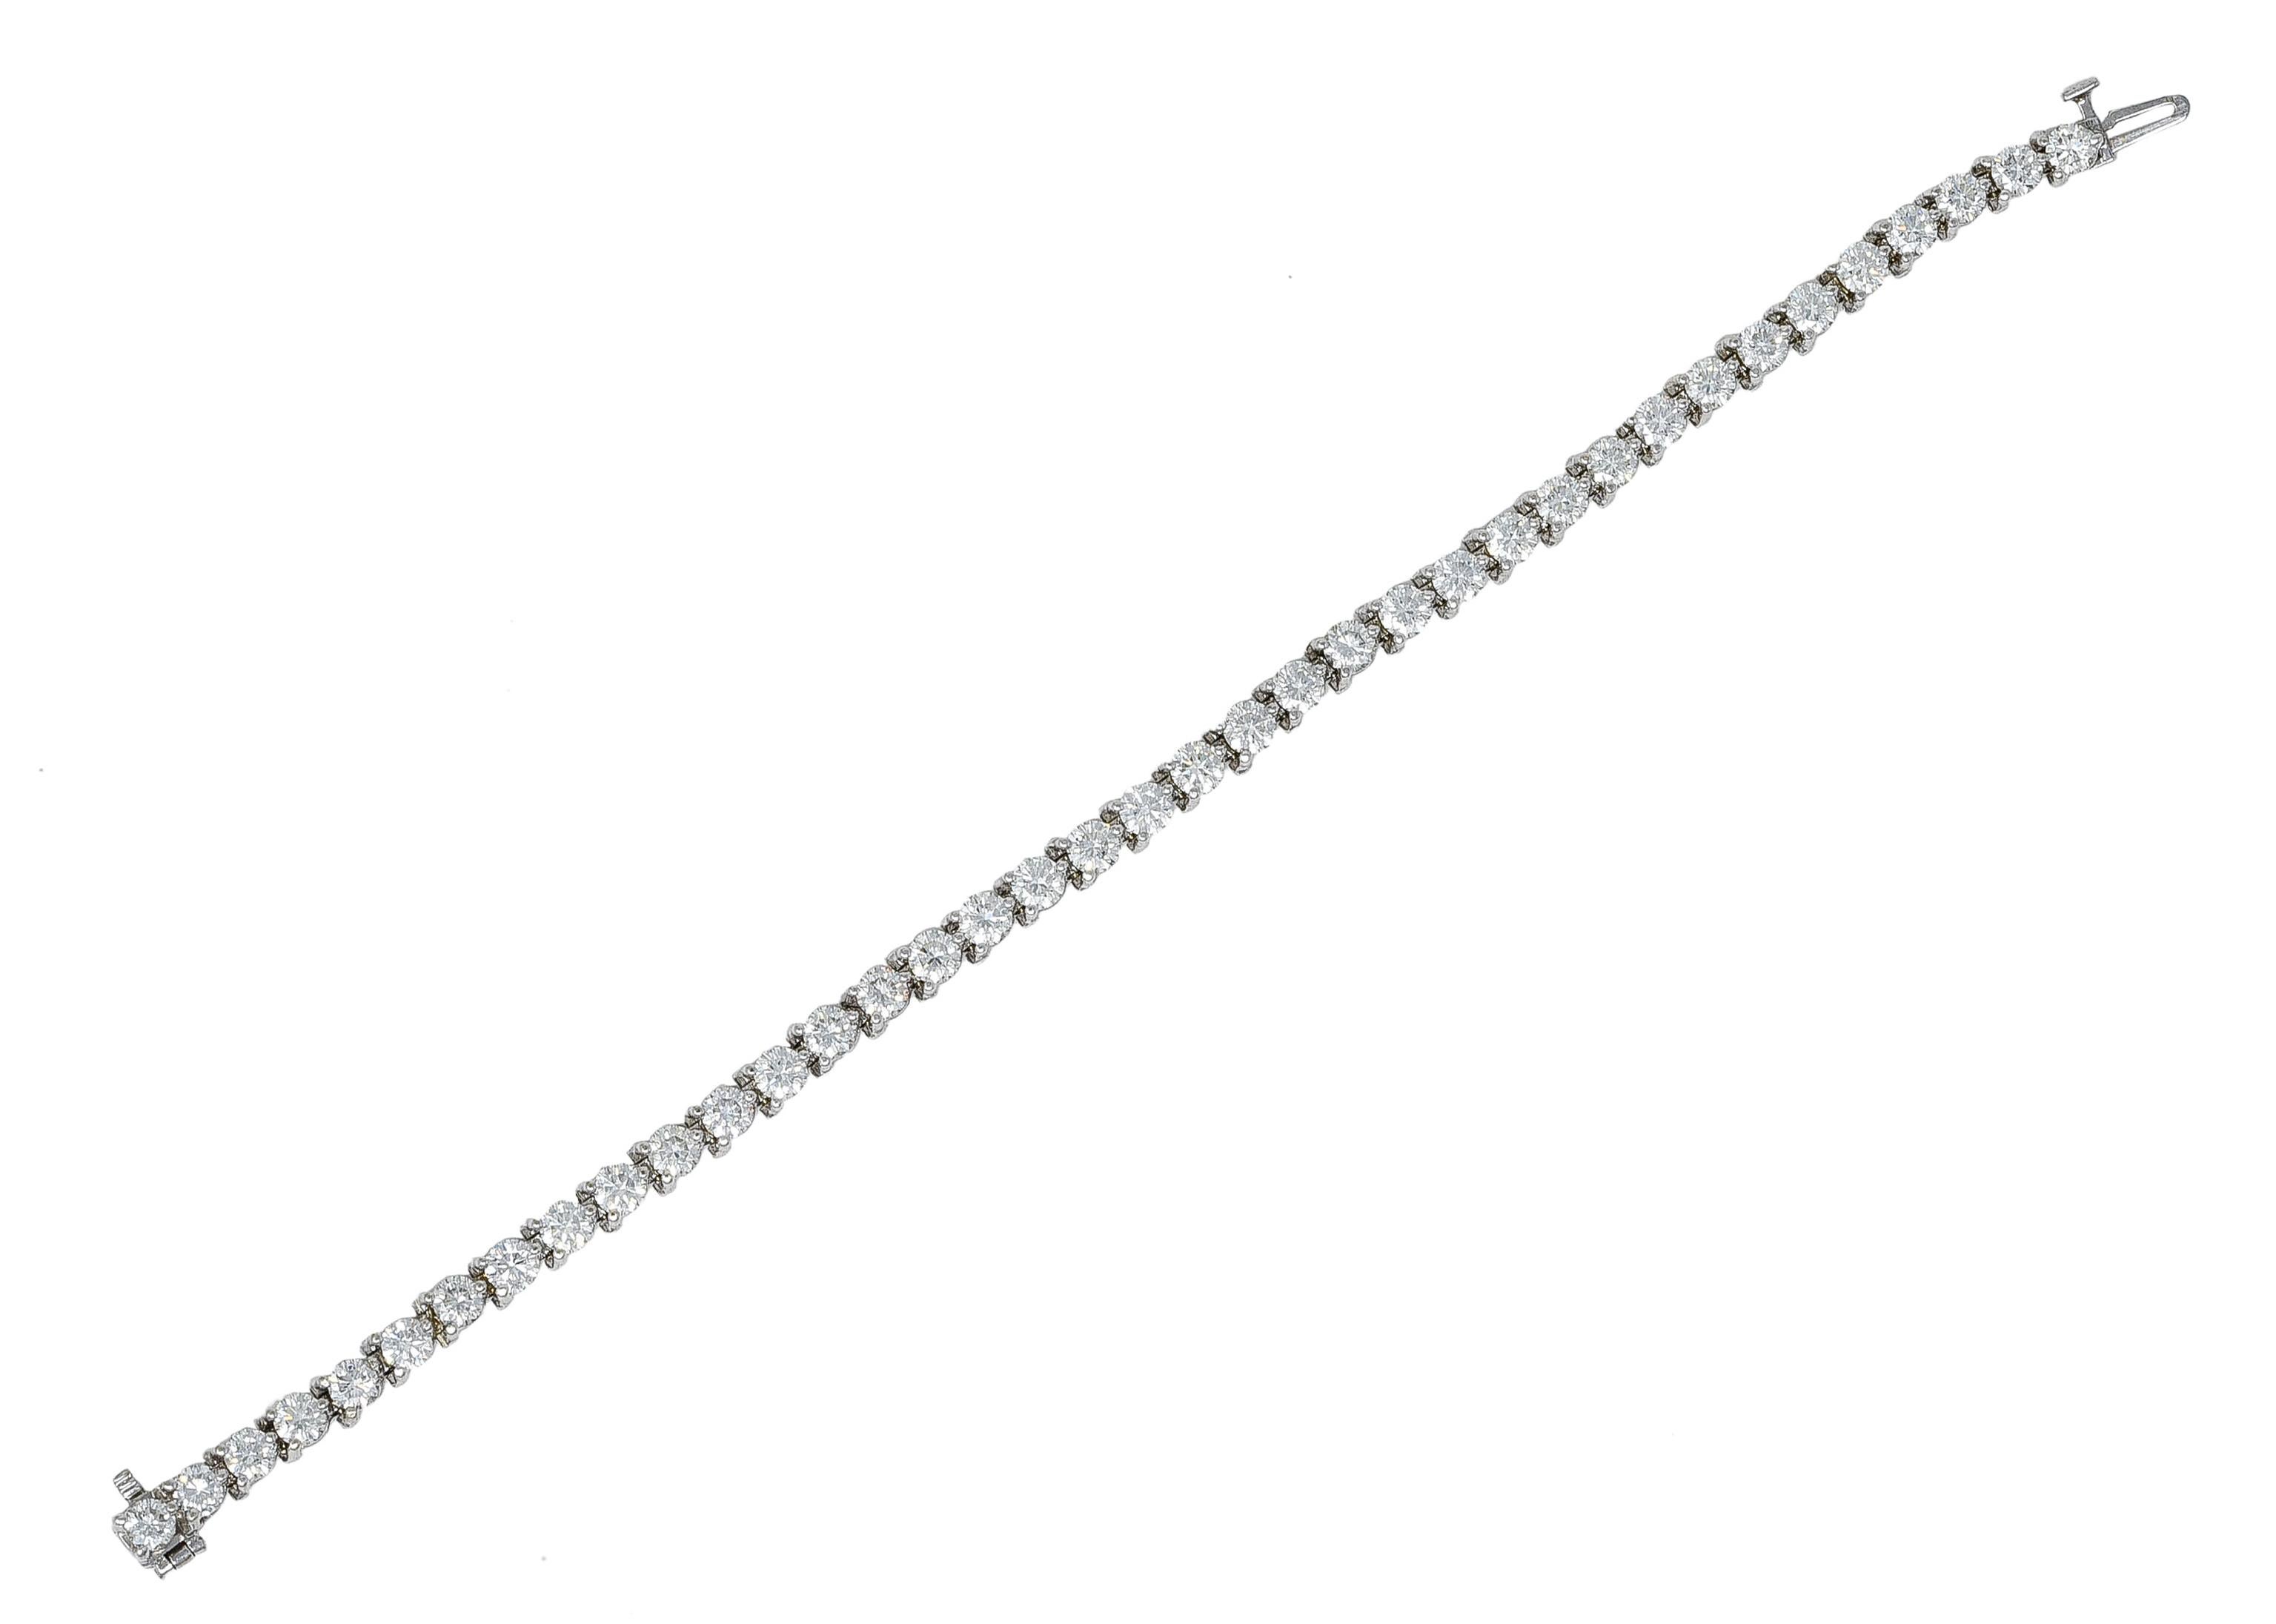 Tennis bracelet is comprised of individually articulated links. Each basket set with a round brilliant cut diamond via martini prong. Weighing in total approximately 7.50 carats. With G/H color; primarily VS2 clarity and some SI1. Completed by a